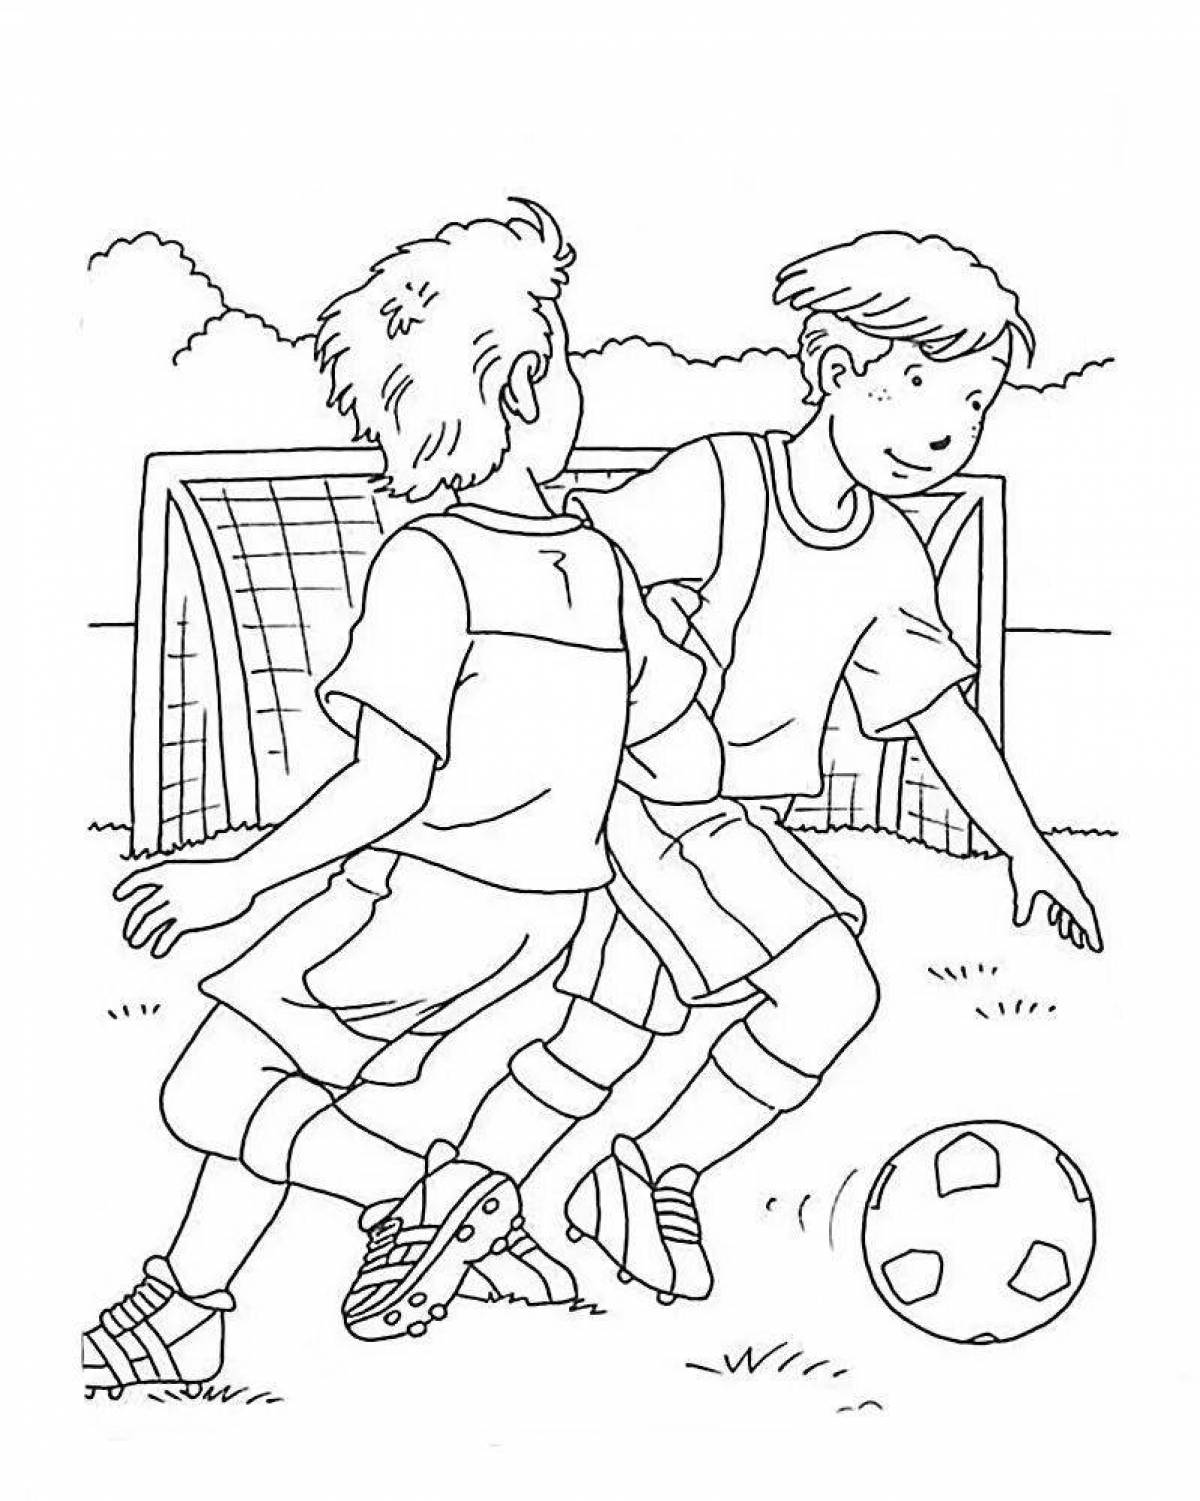 Bright football coloring pages for boys